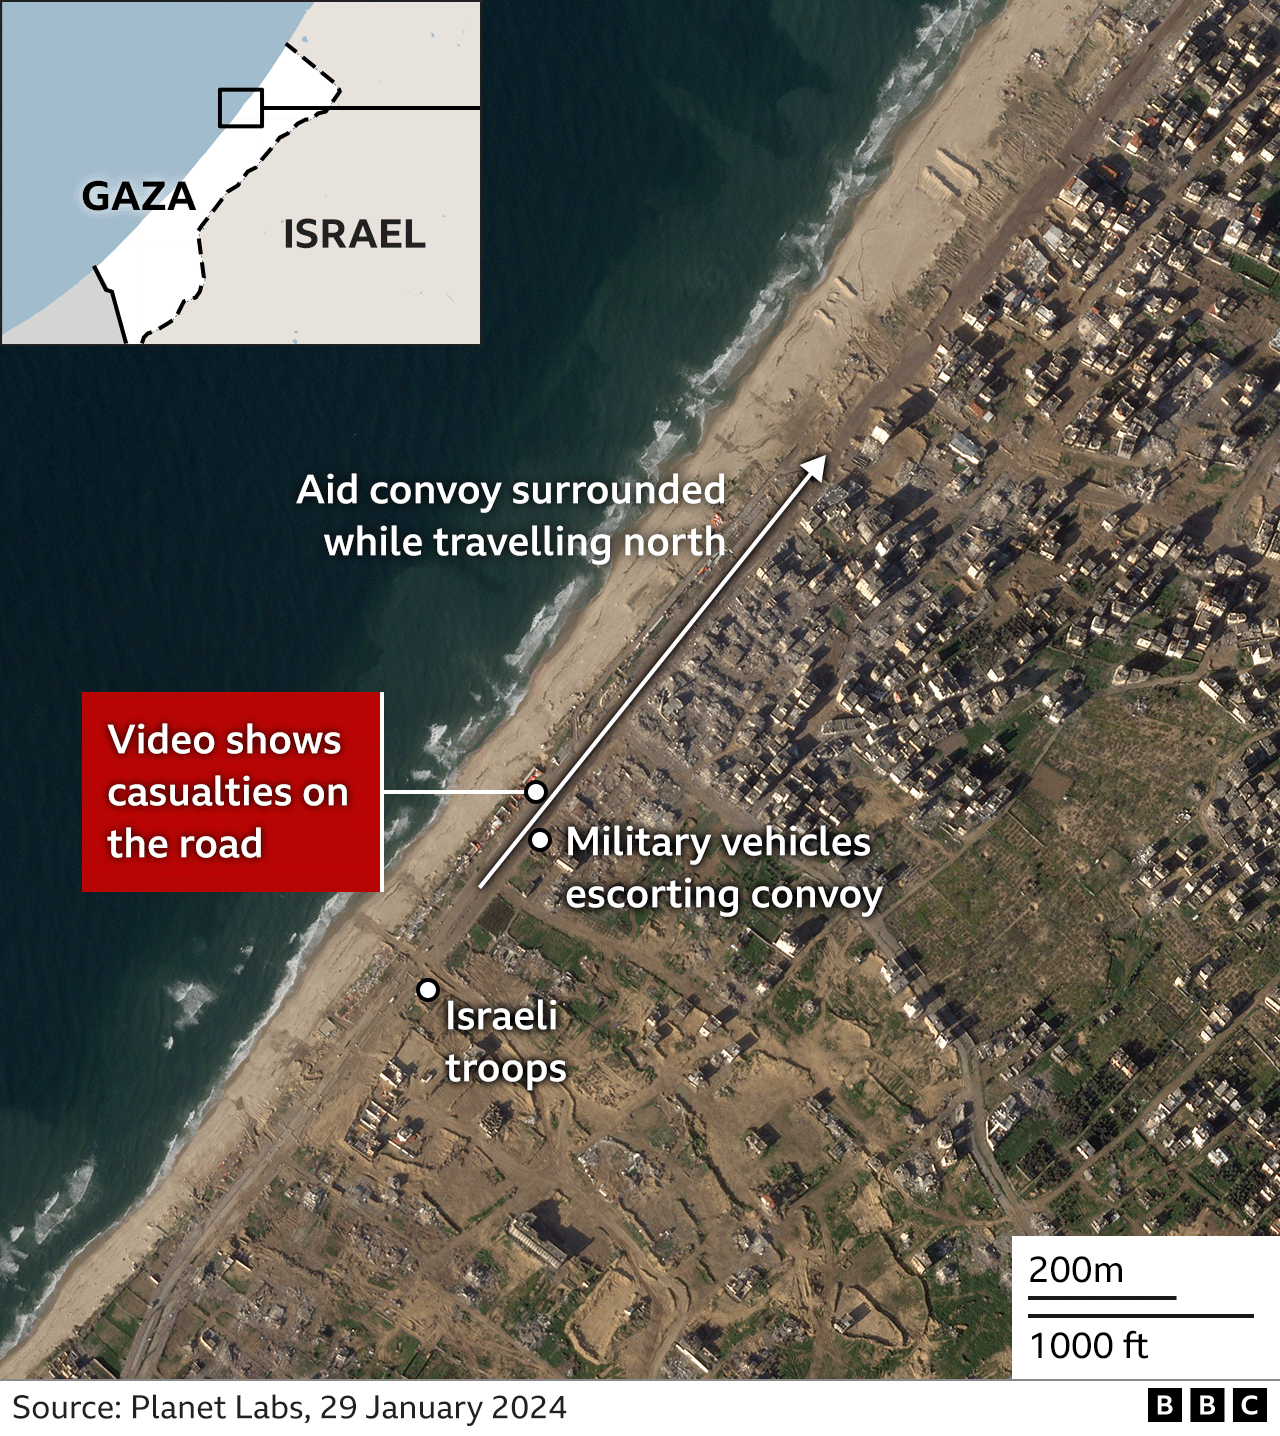 Map showing where the incident with the aid convoy took place in Gaza